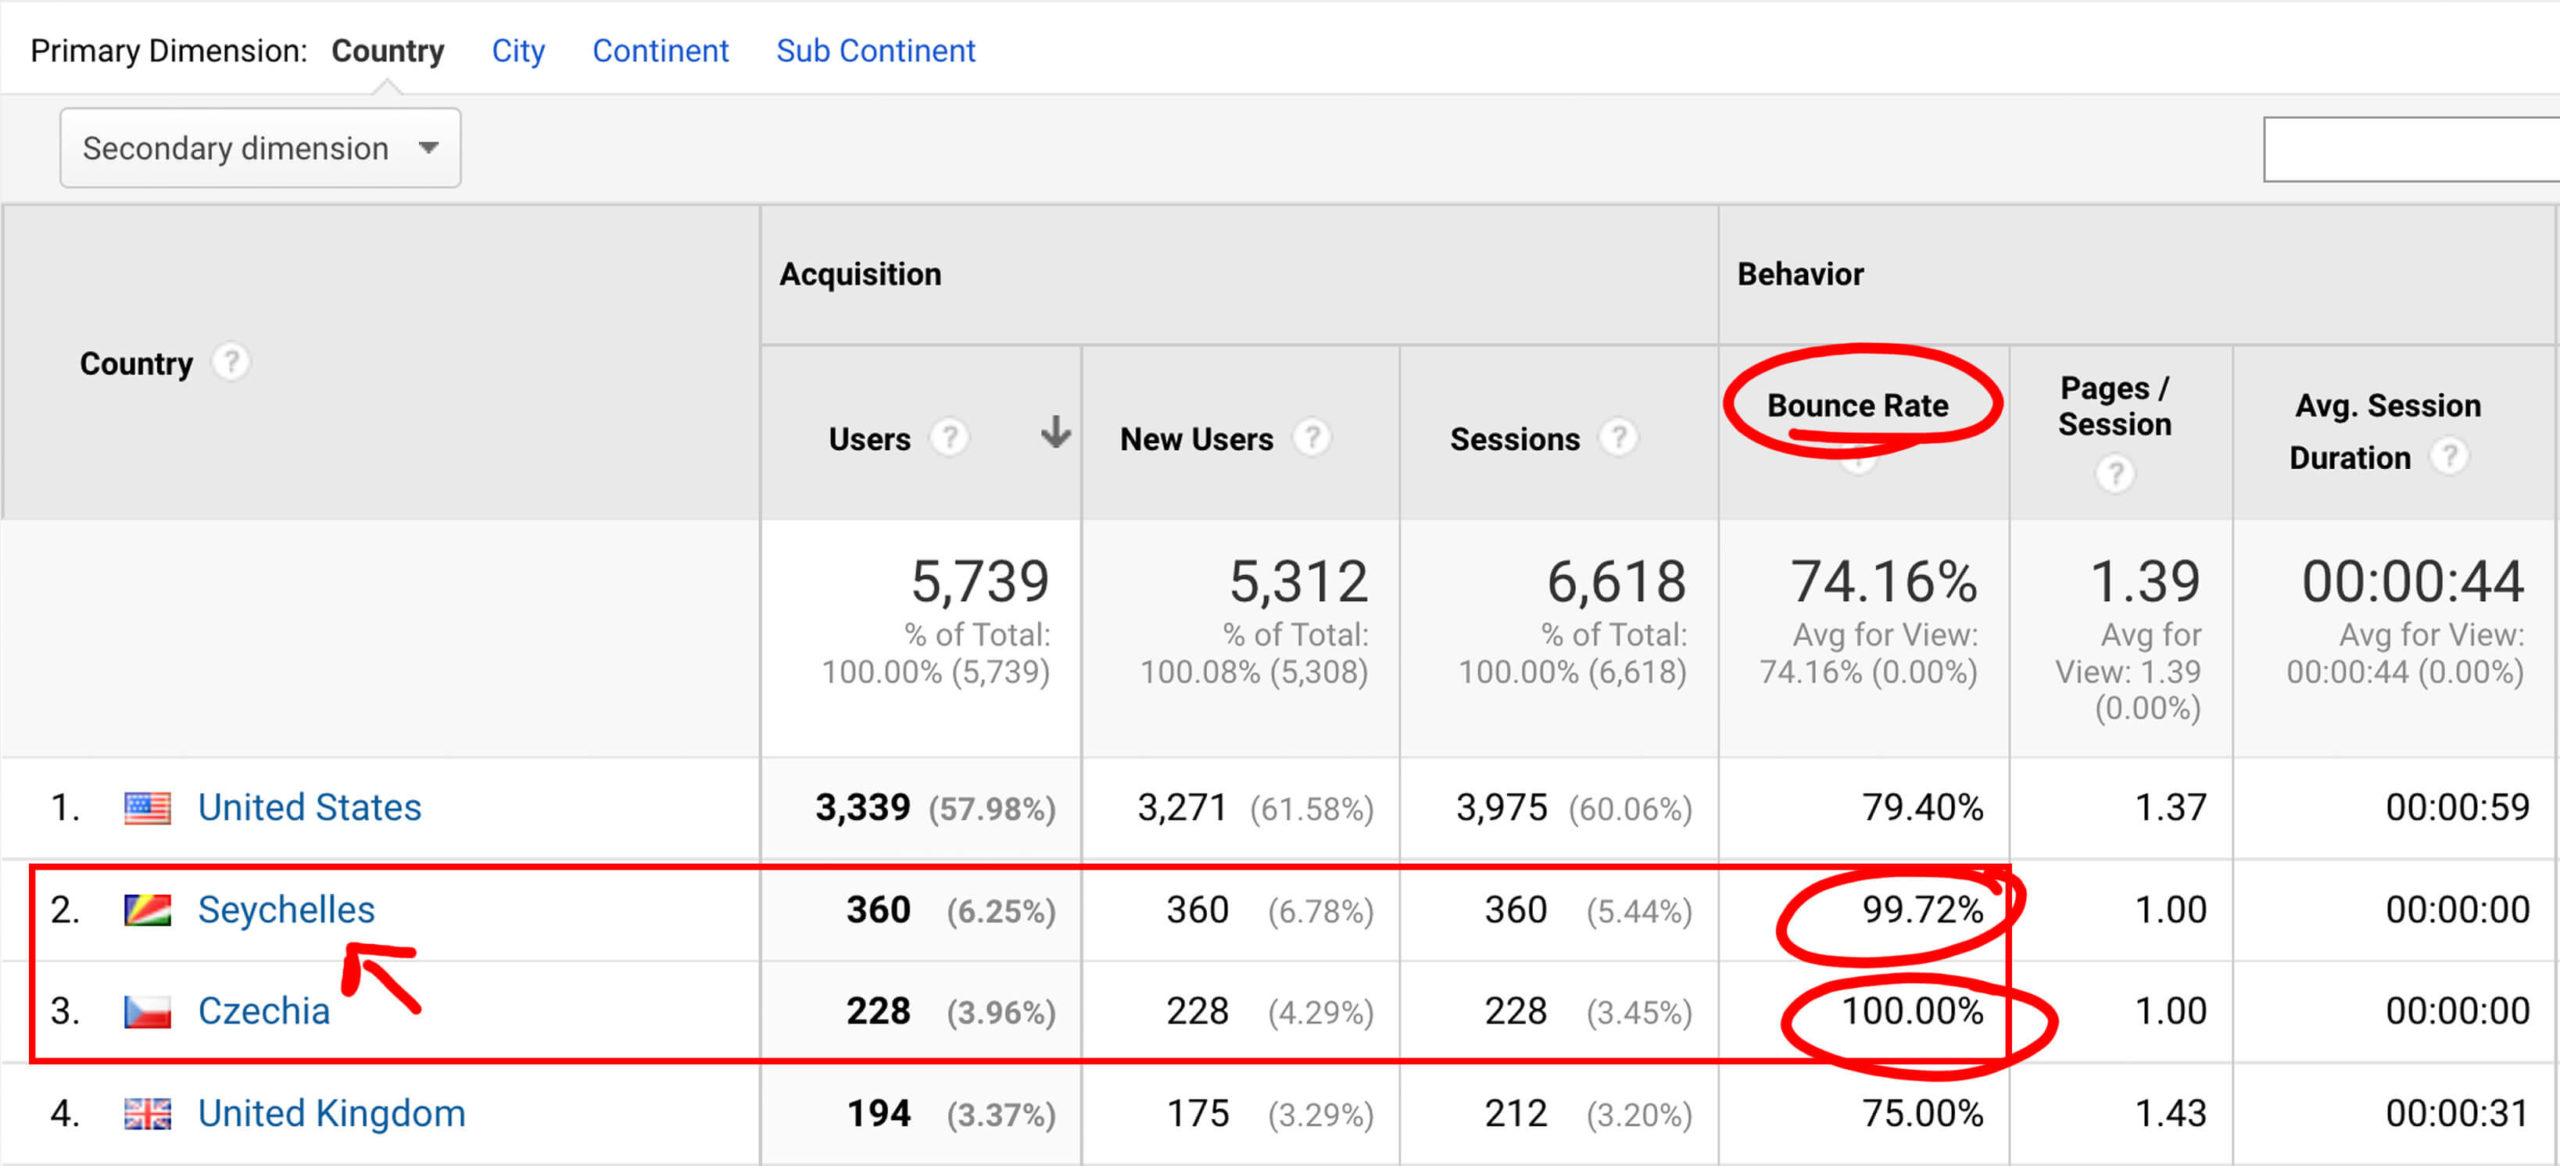 100% bounce rate of traffic from Czechia and 99.72% from Seychelles in Google Analytics Classic.